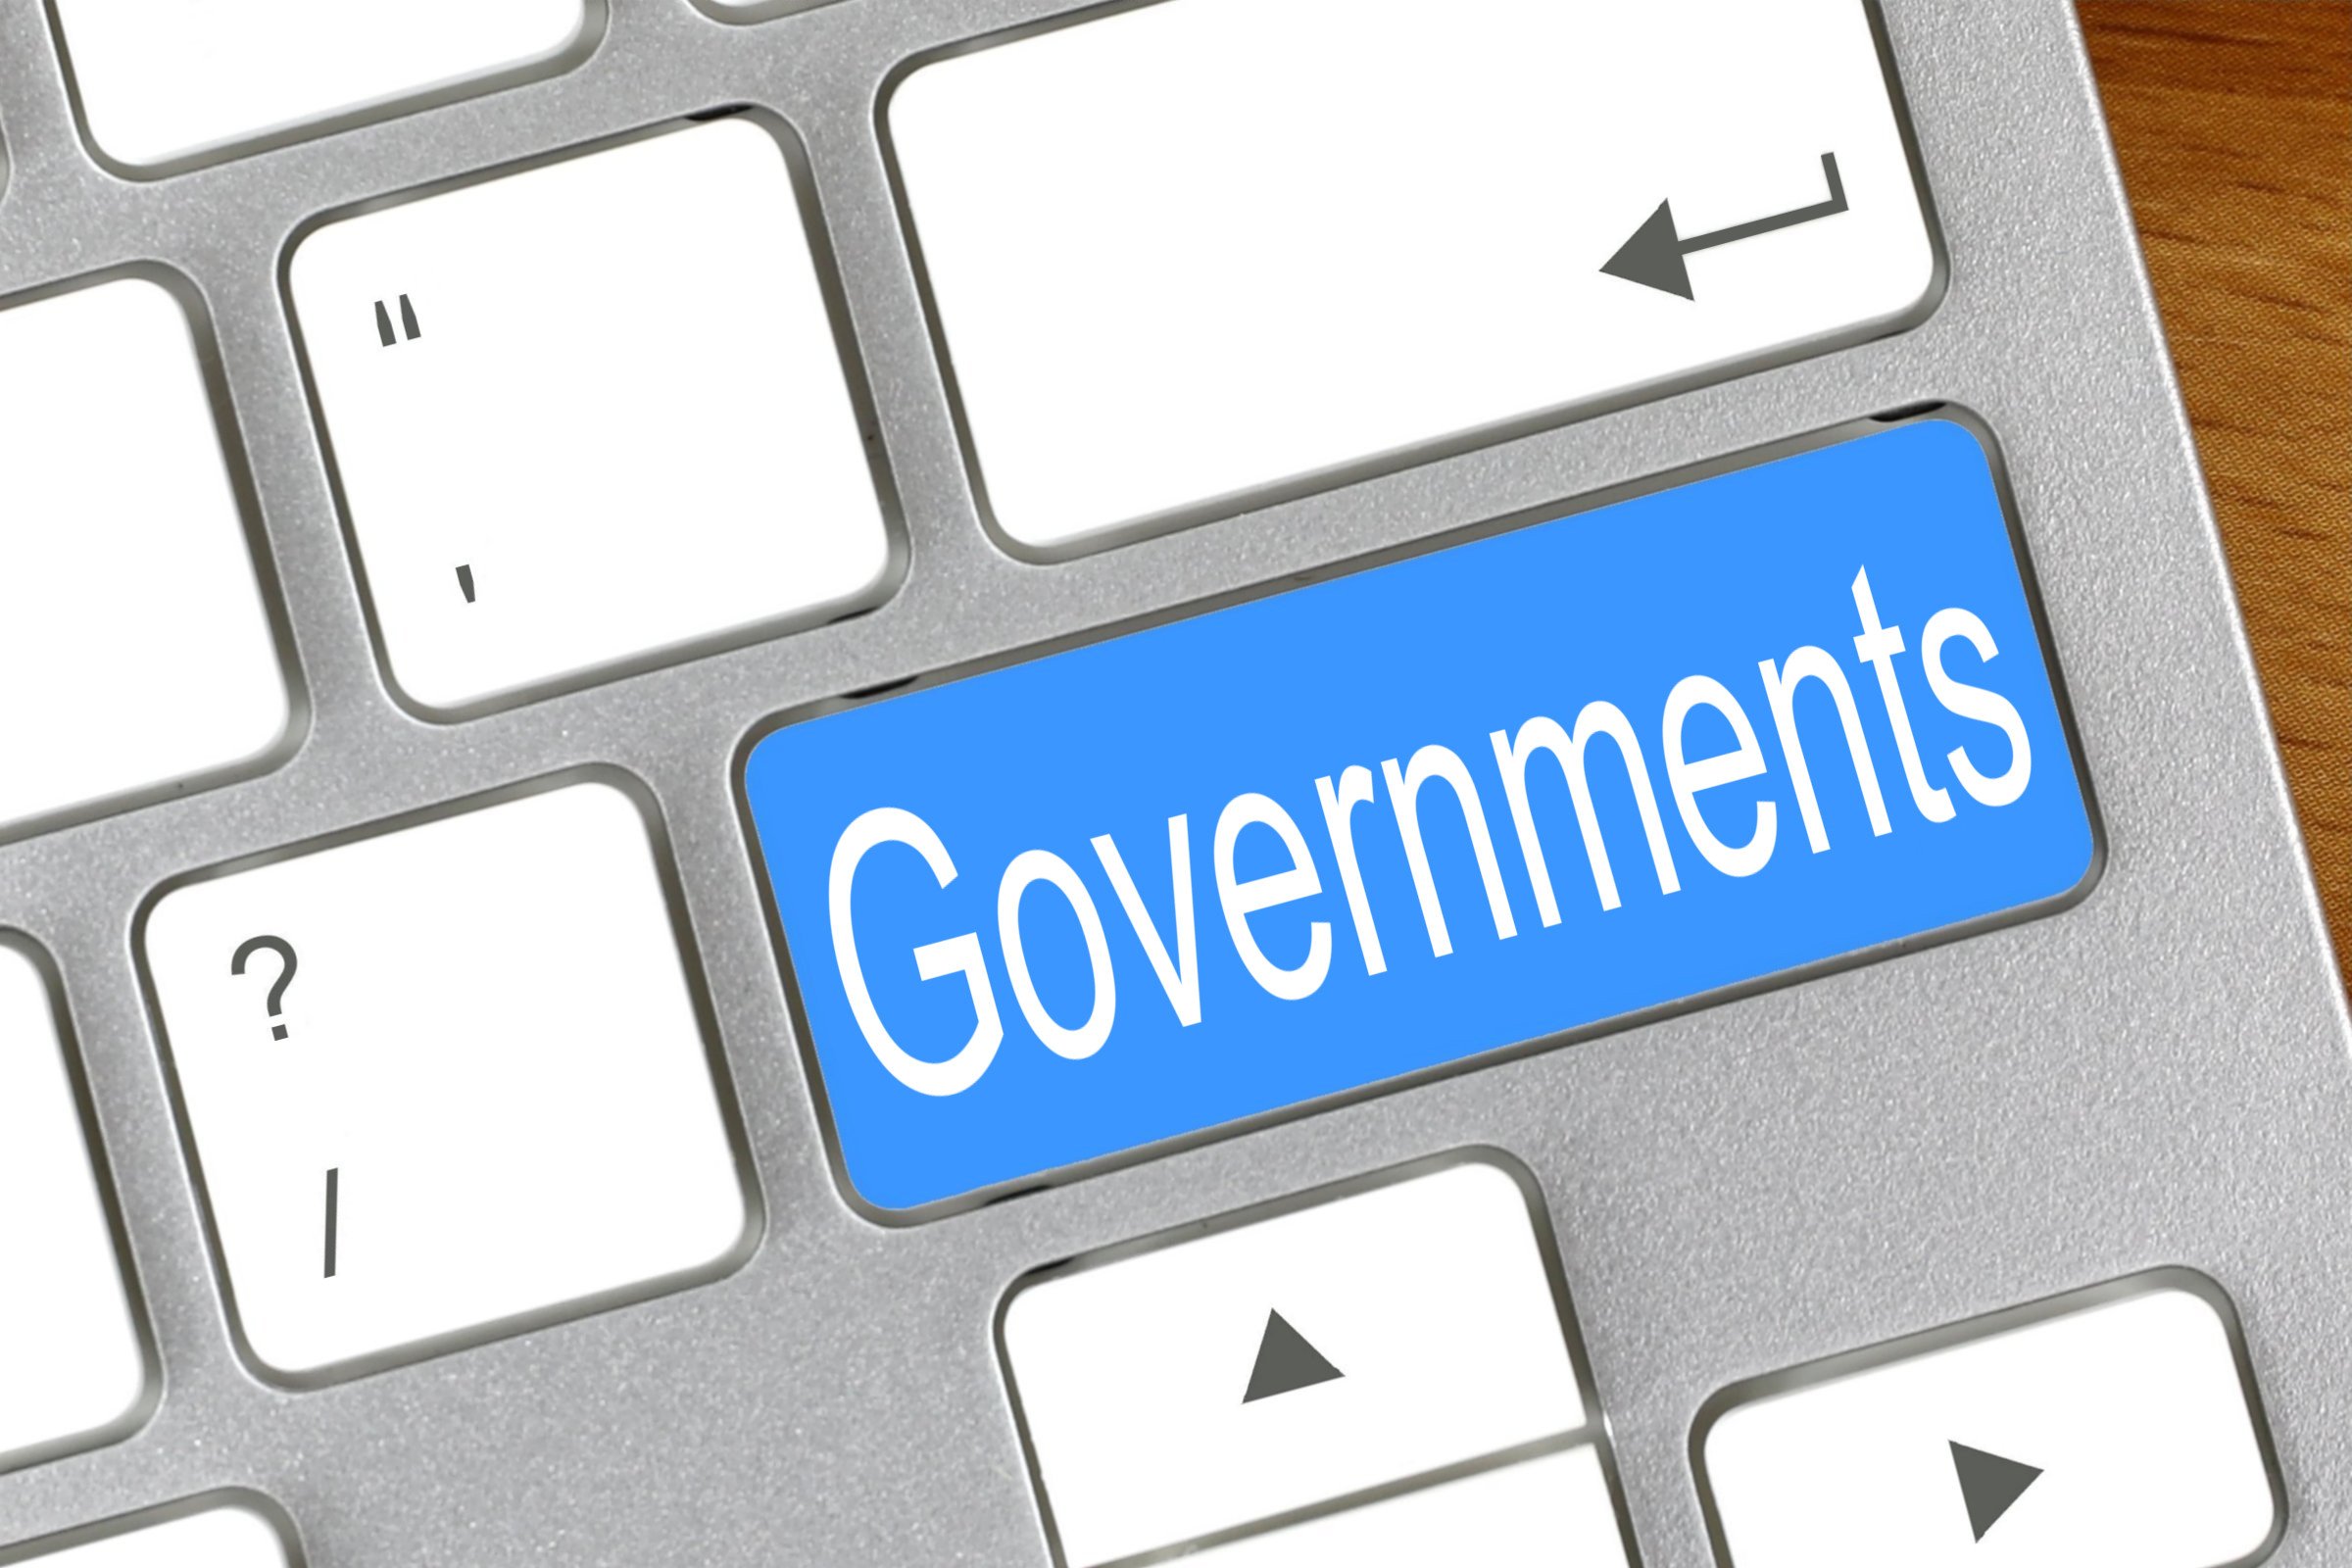 governments